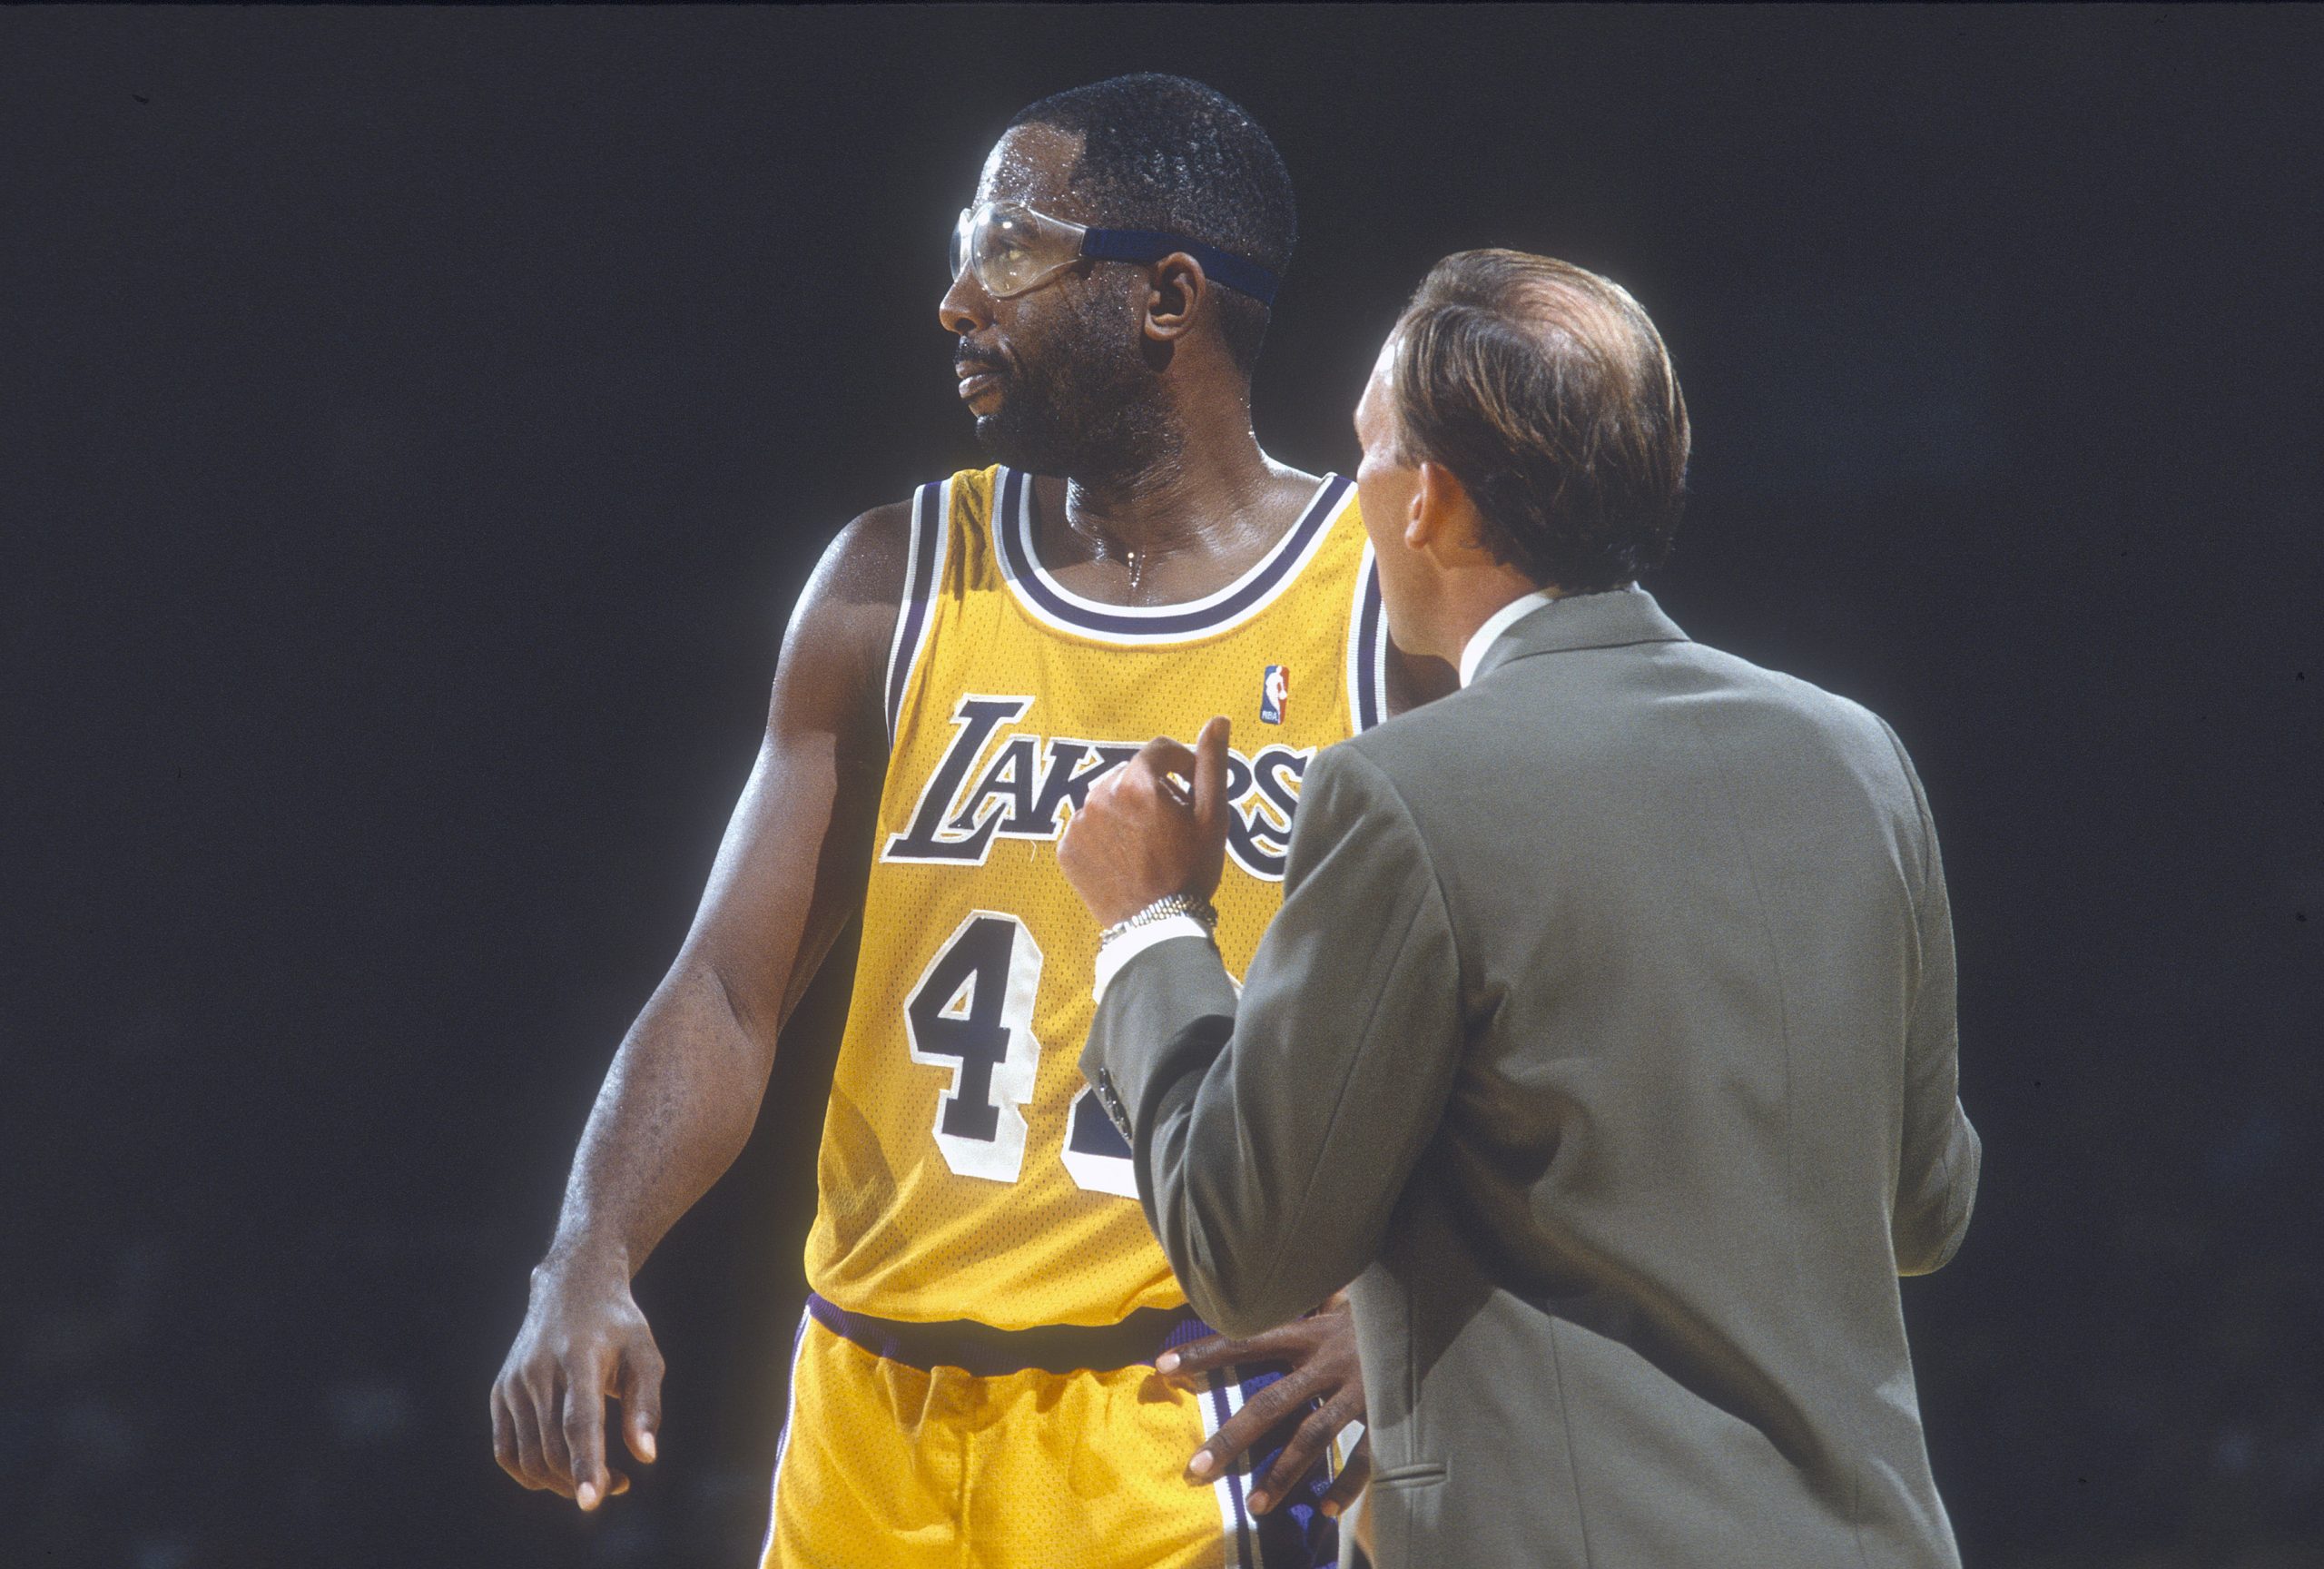 James Worthy Admits He Still Has Night Sweats Over His Costly Mistake 37 Years Ago Against the Celtics in the 1984 NBA Finals